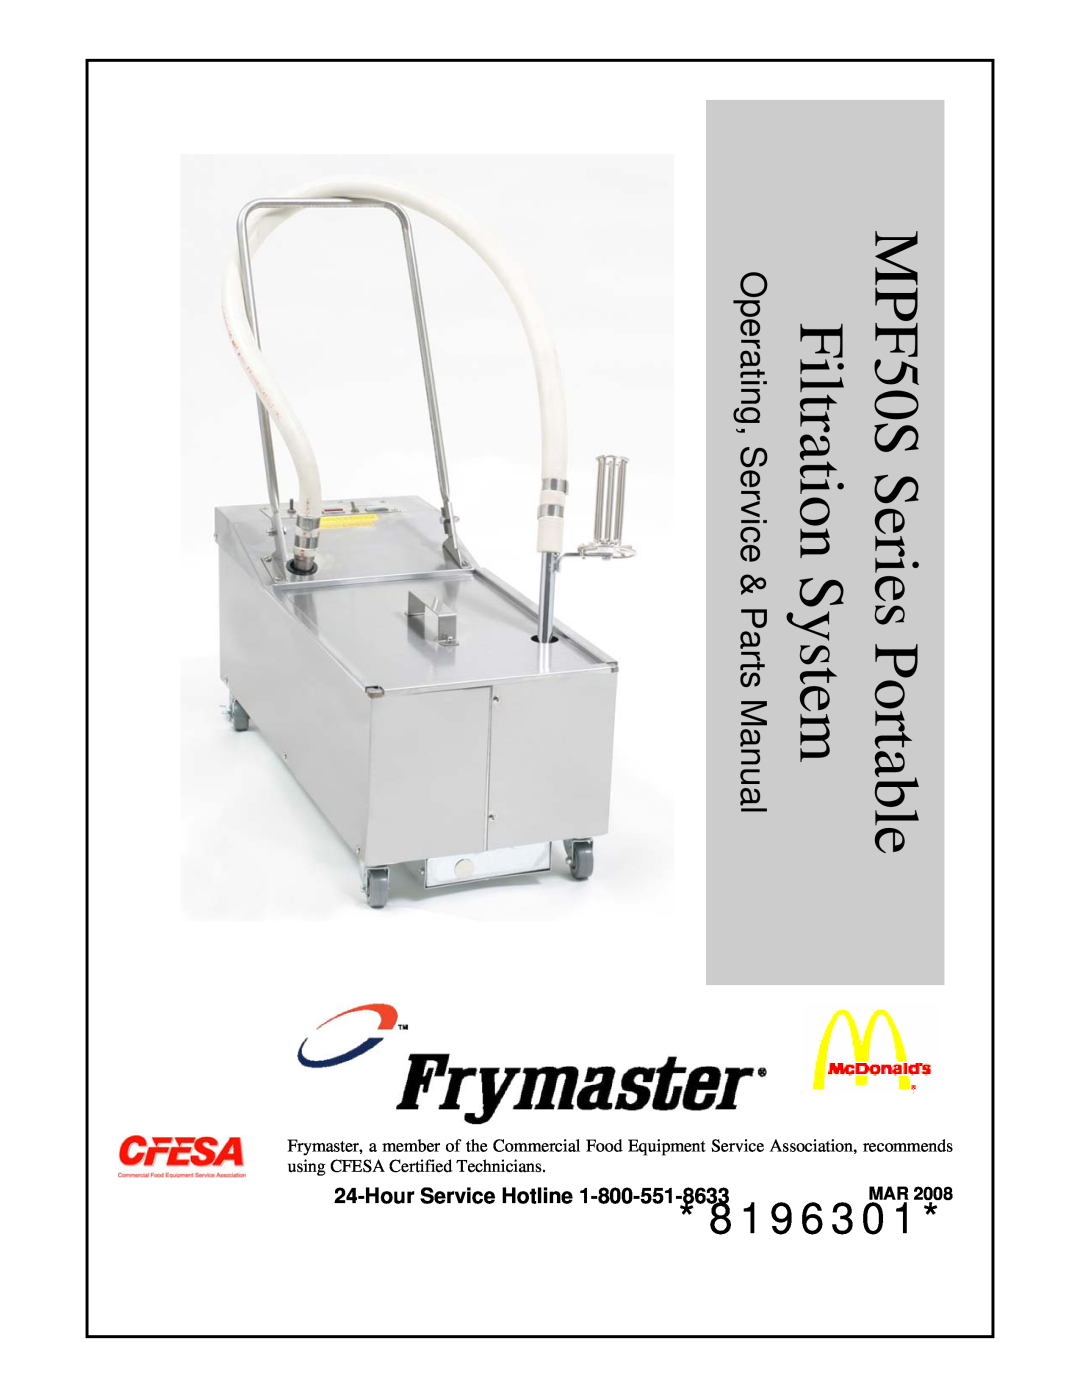 Frymaster manual HourService Hotline, 8196301, Operating, Service & Parts Manual, MPF50S Series Portable 